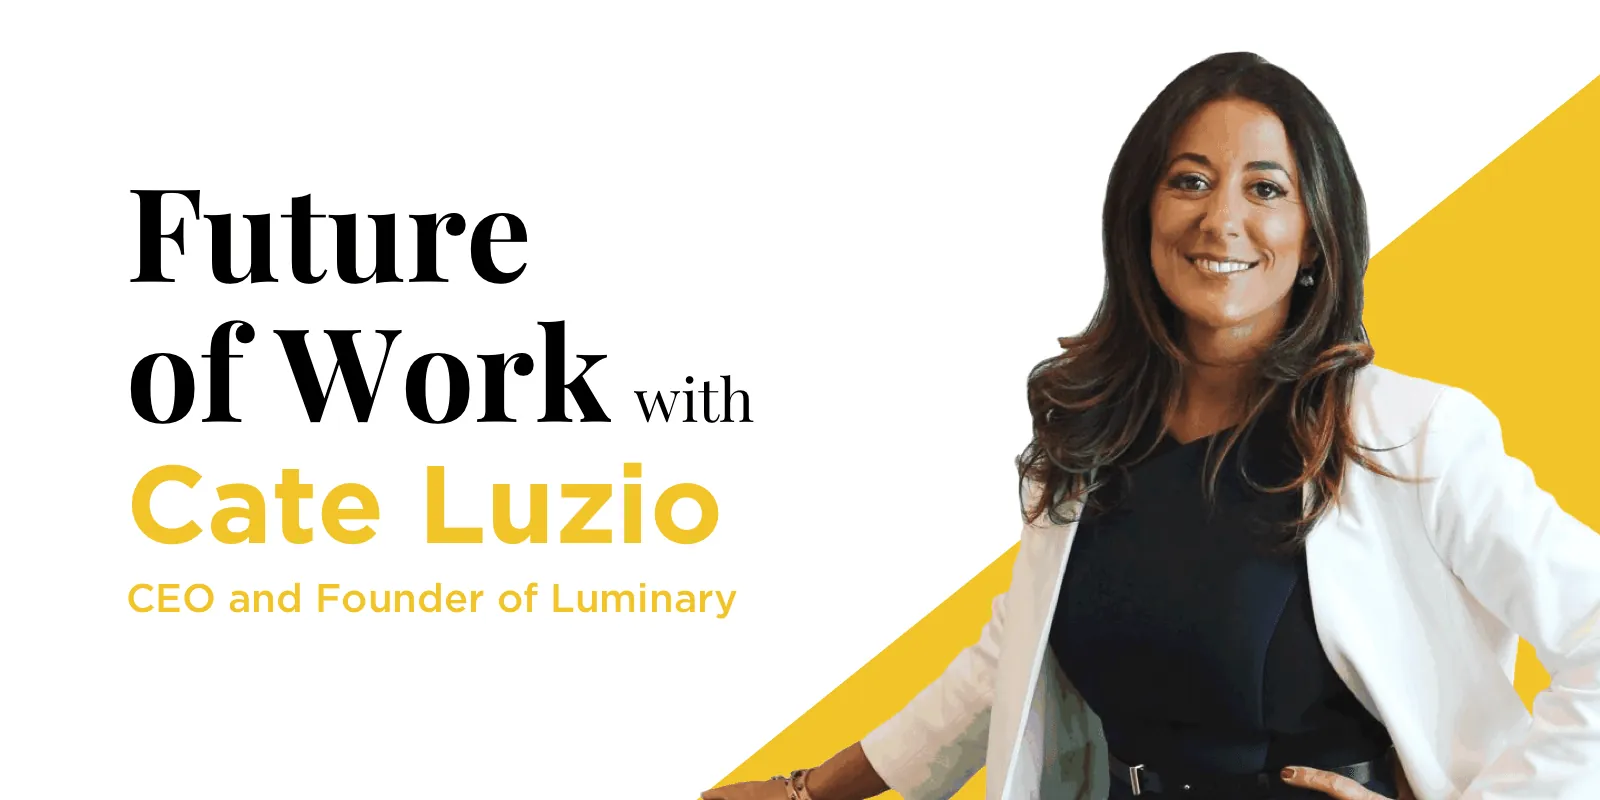 Future of Work with Cate Luzio